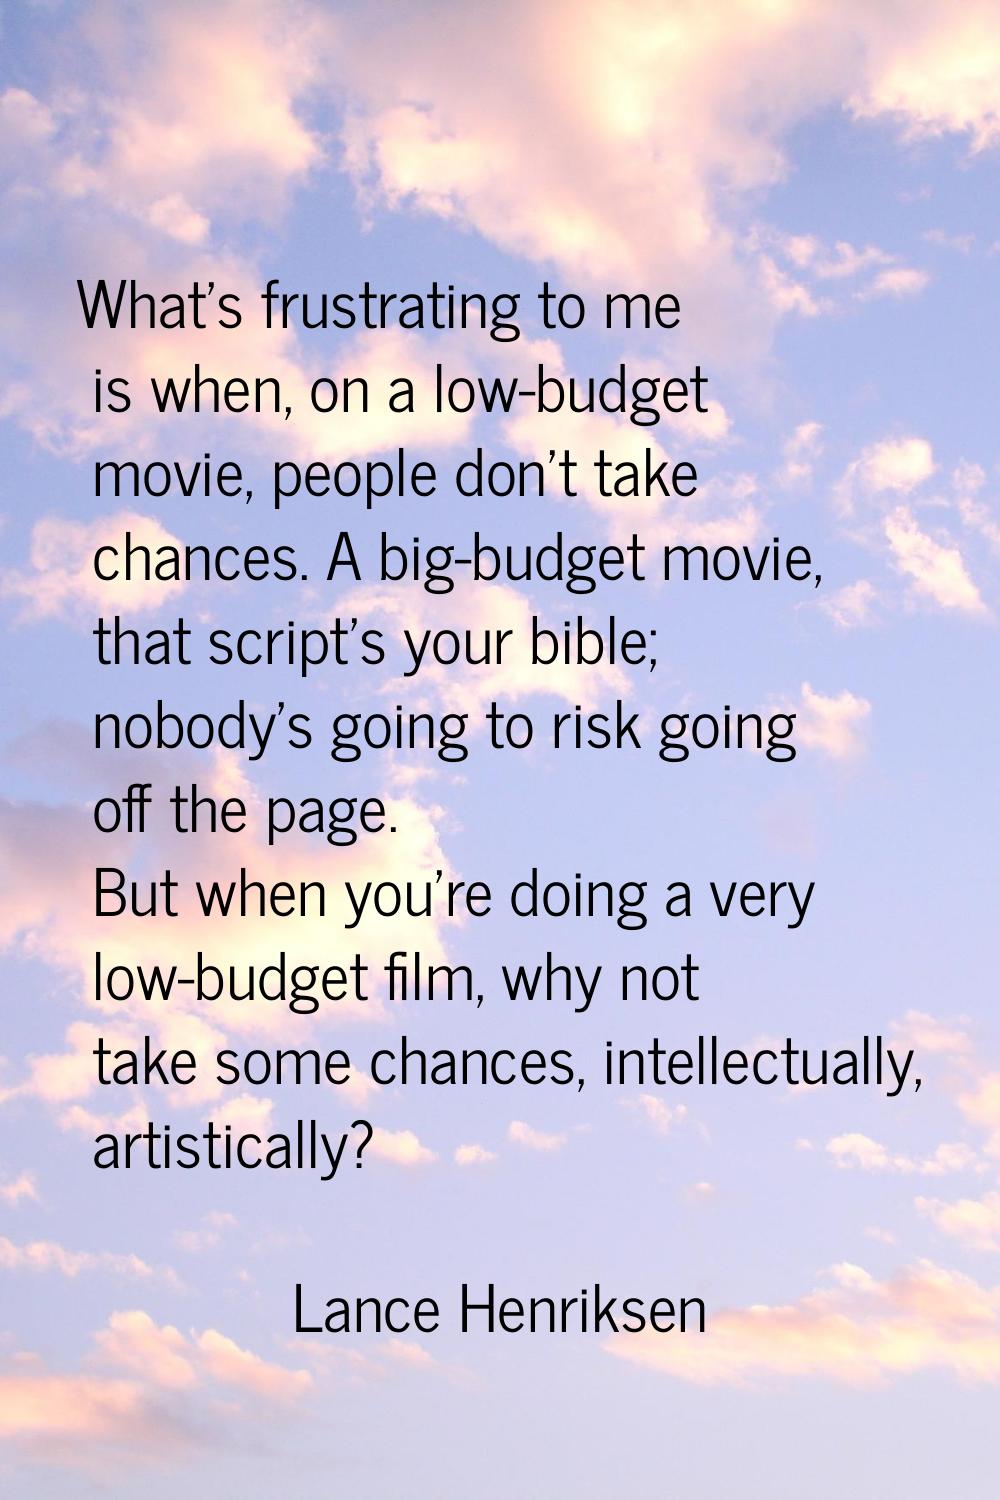 What's frustrating to me is when, on a low-budget movie, people don't take chances. A big-budget mo